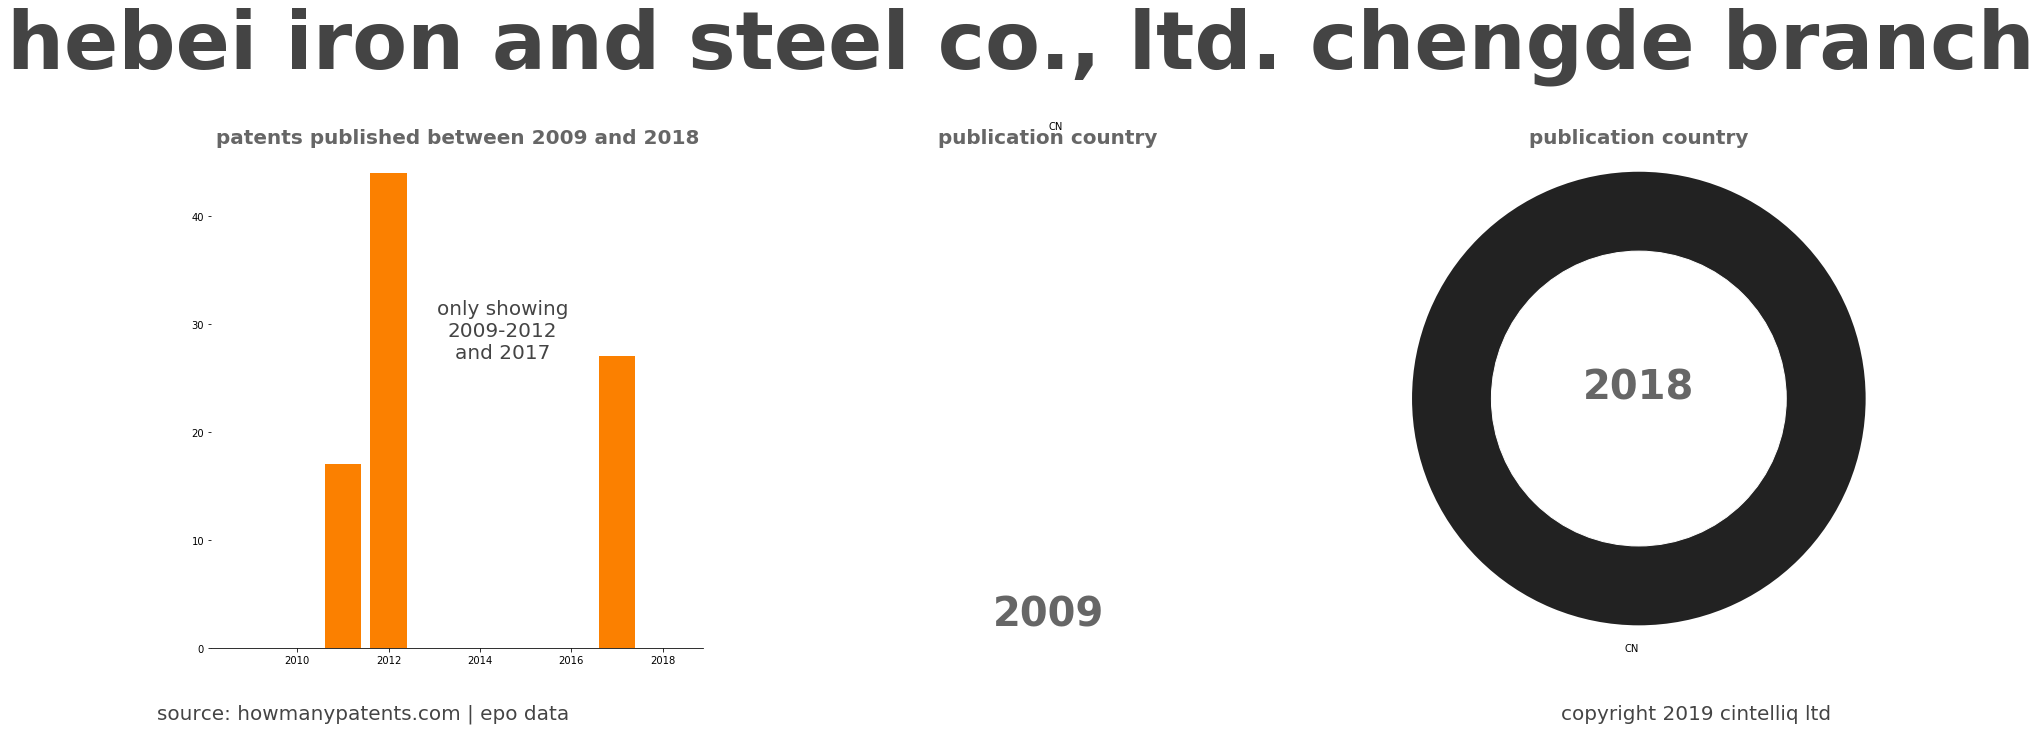 summary of patents for Hebei Iron And Steel Co., Ltd. Chengde Branch